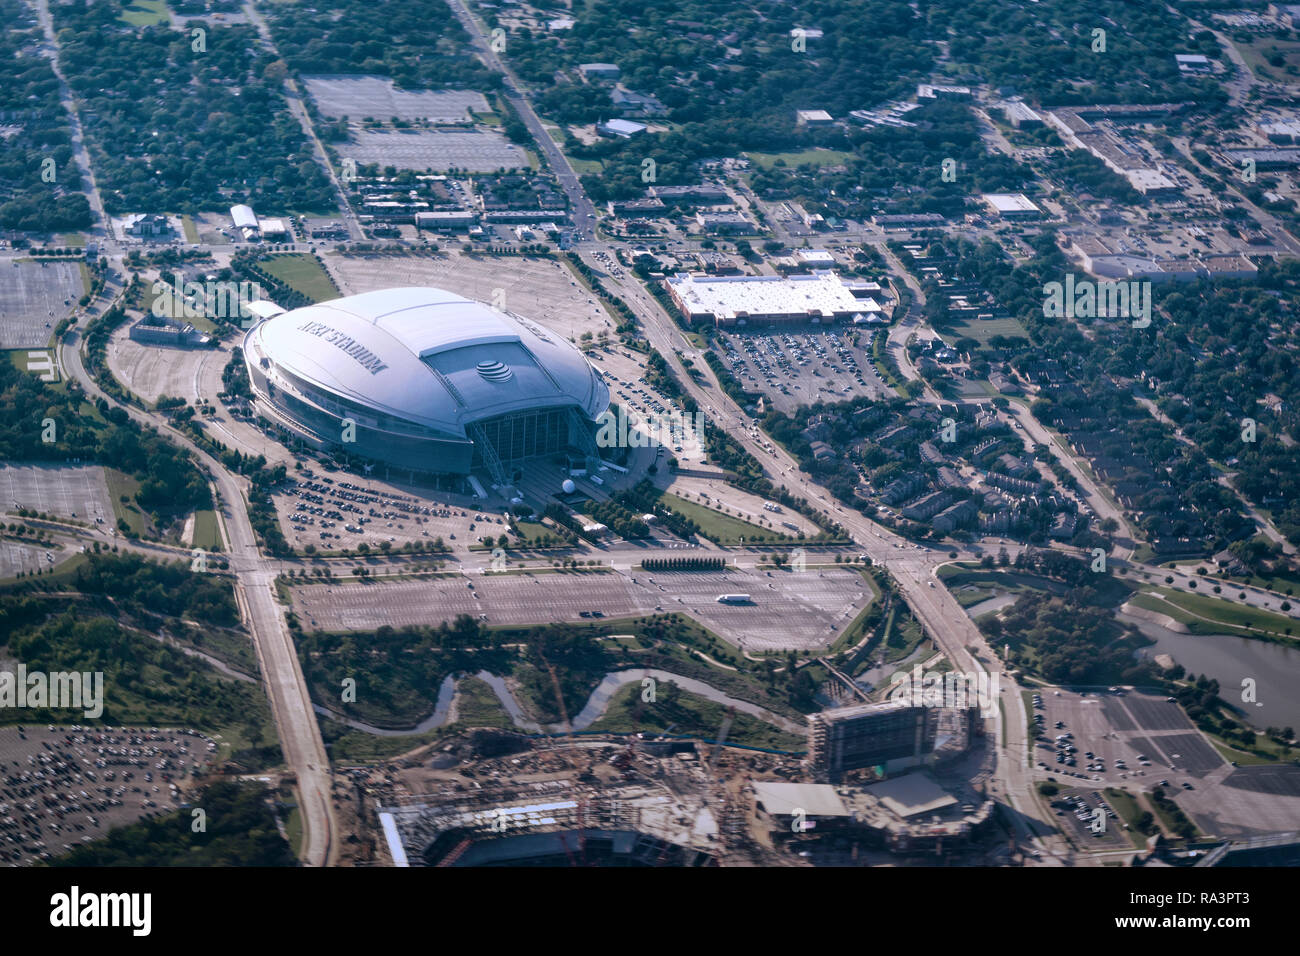 Arlington, Texas / USA - 10/11/2018: AT&T football Stadium,  completed on May 27, 2009, is home of the Dallas Cowboys and home of the Cotton Bowl Clas Stock Photo